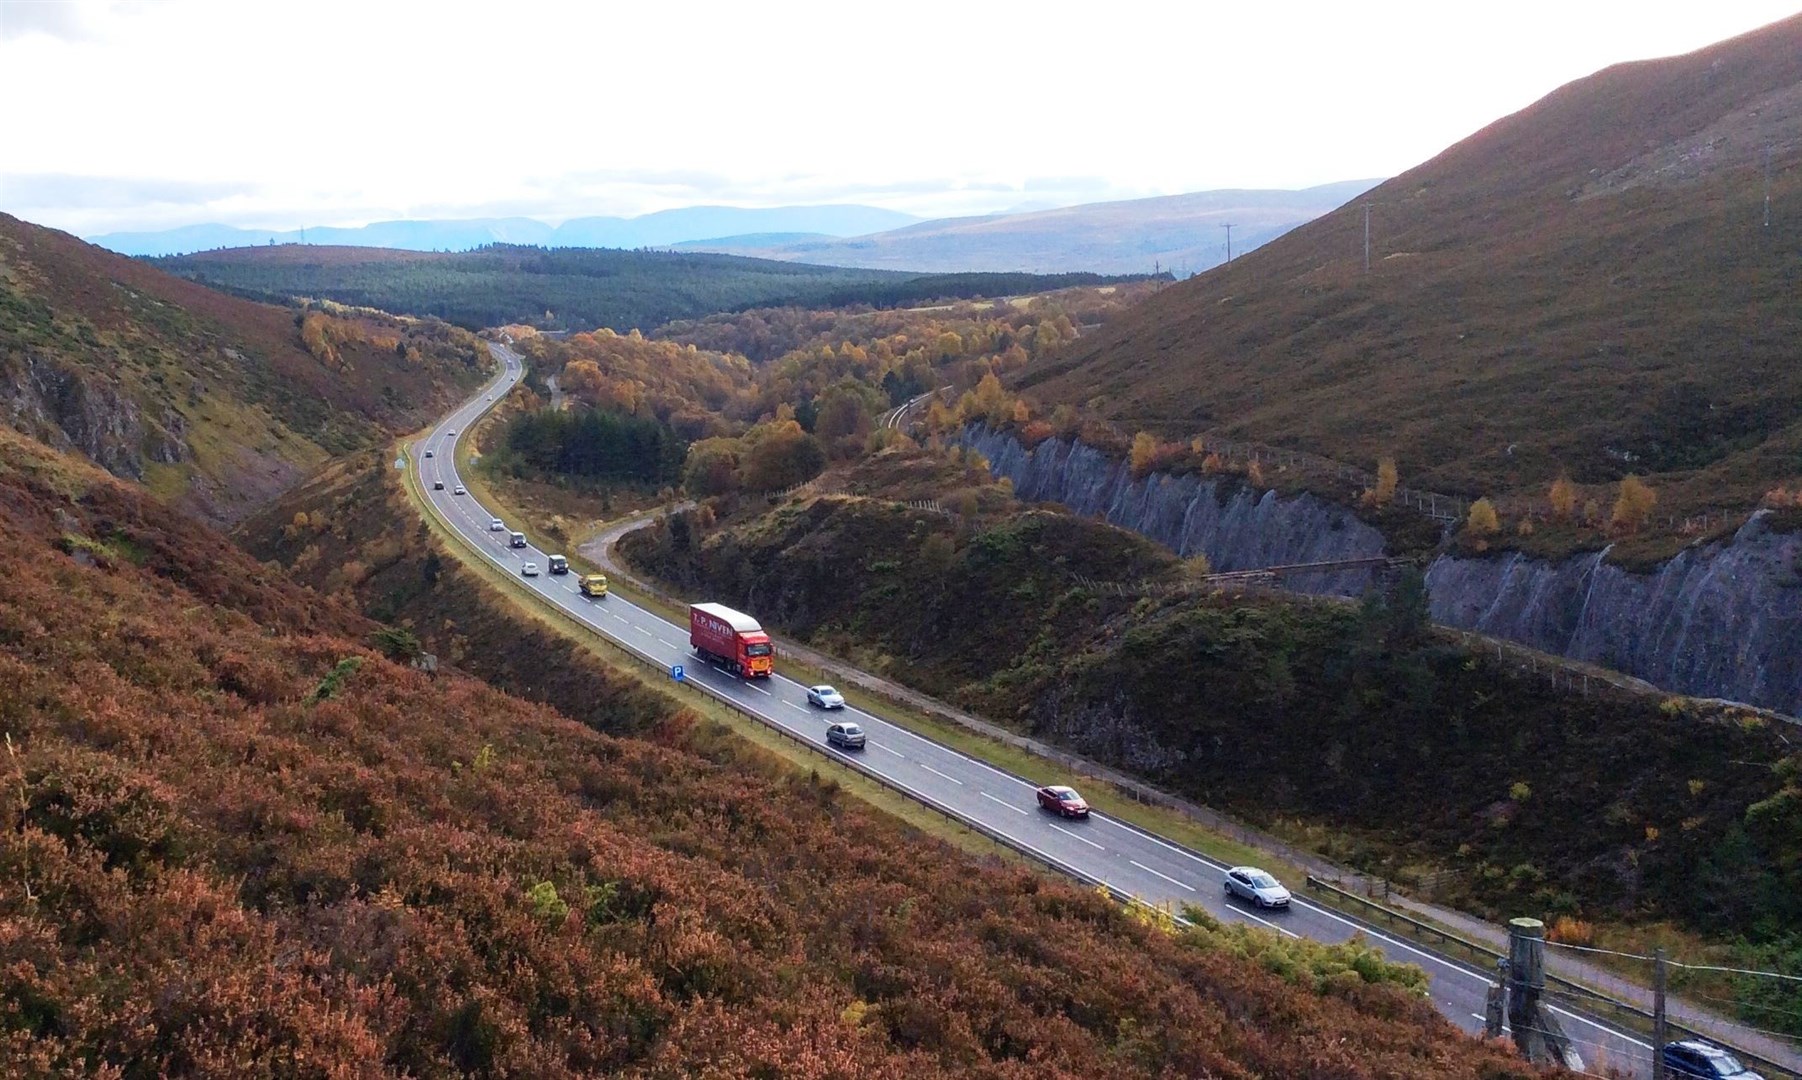 Slochd summit on the A9 was the scene of a fatal accident in July when three people, including a two-year-old lost their lives.